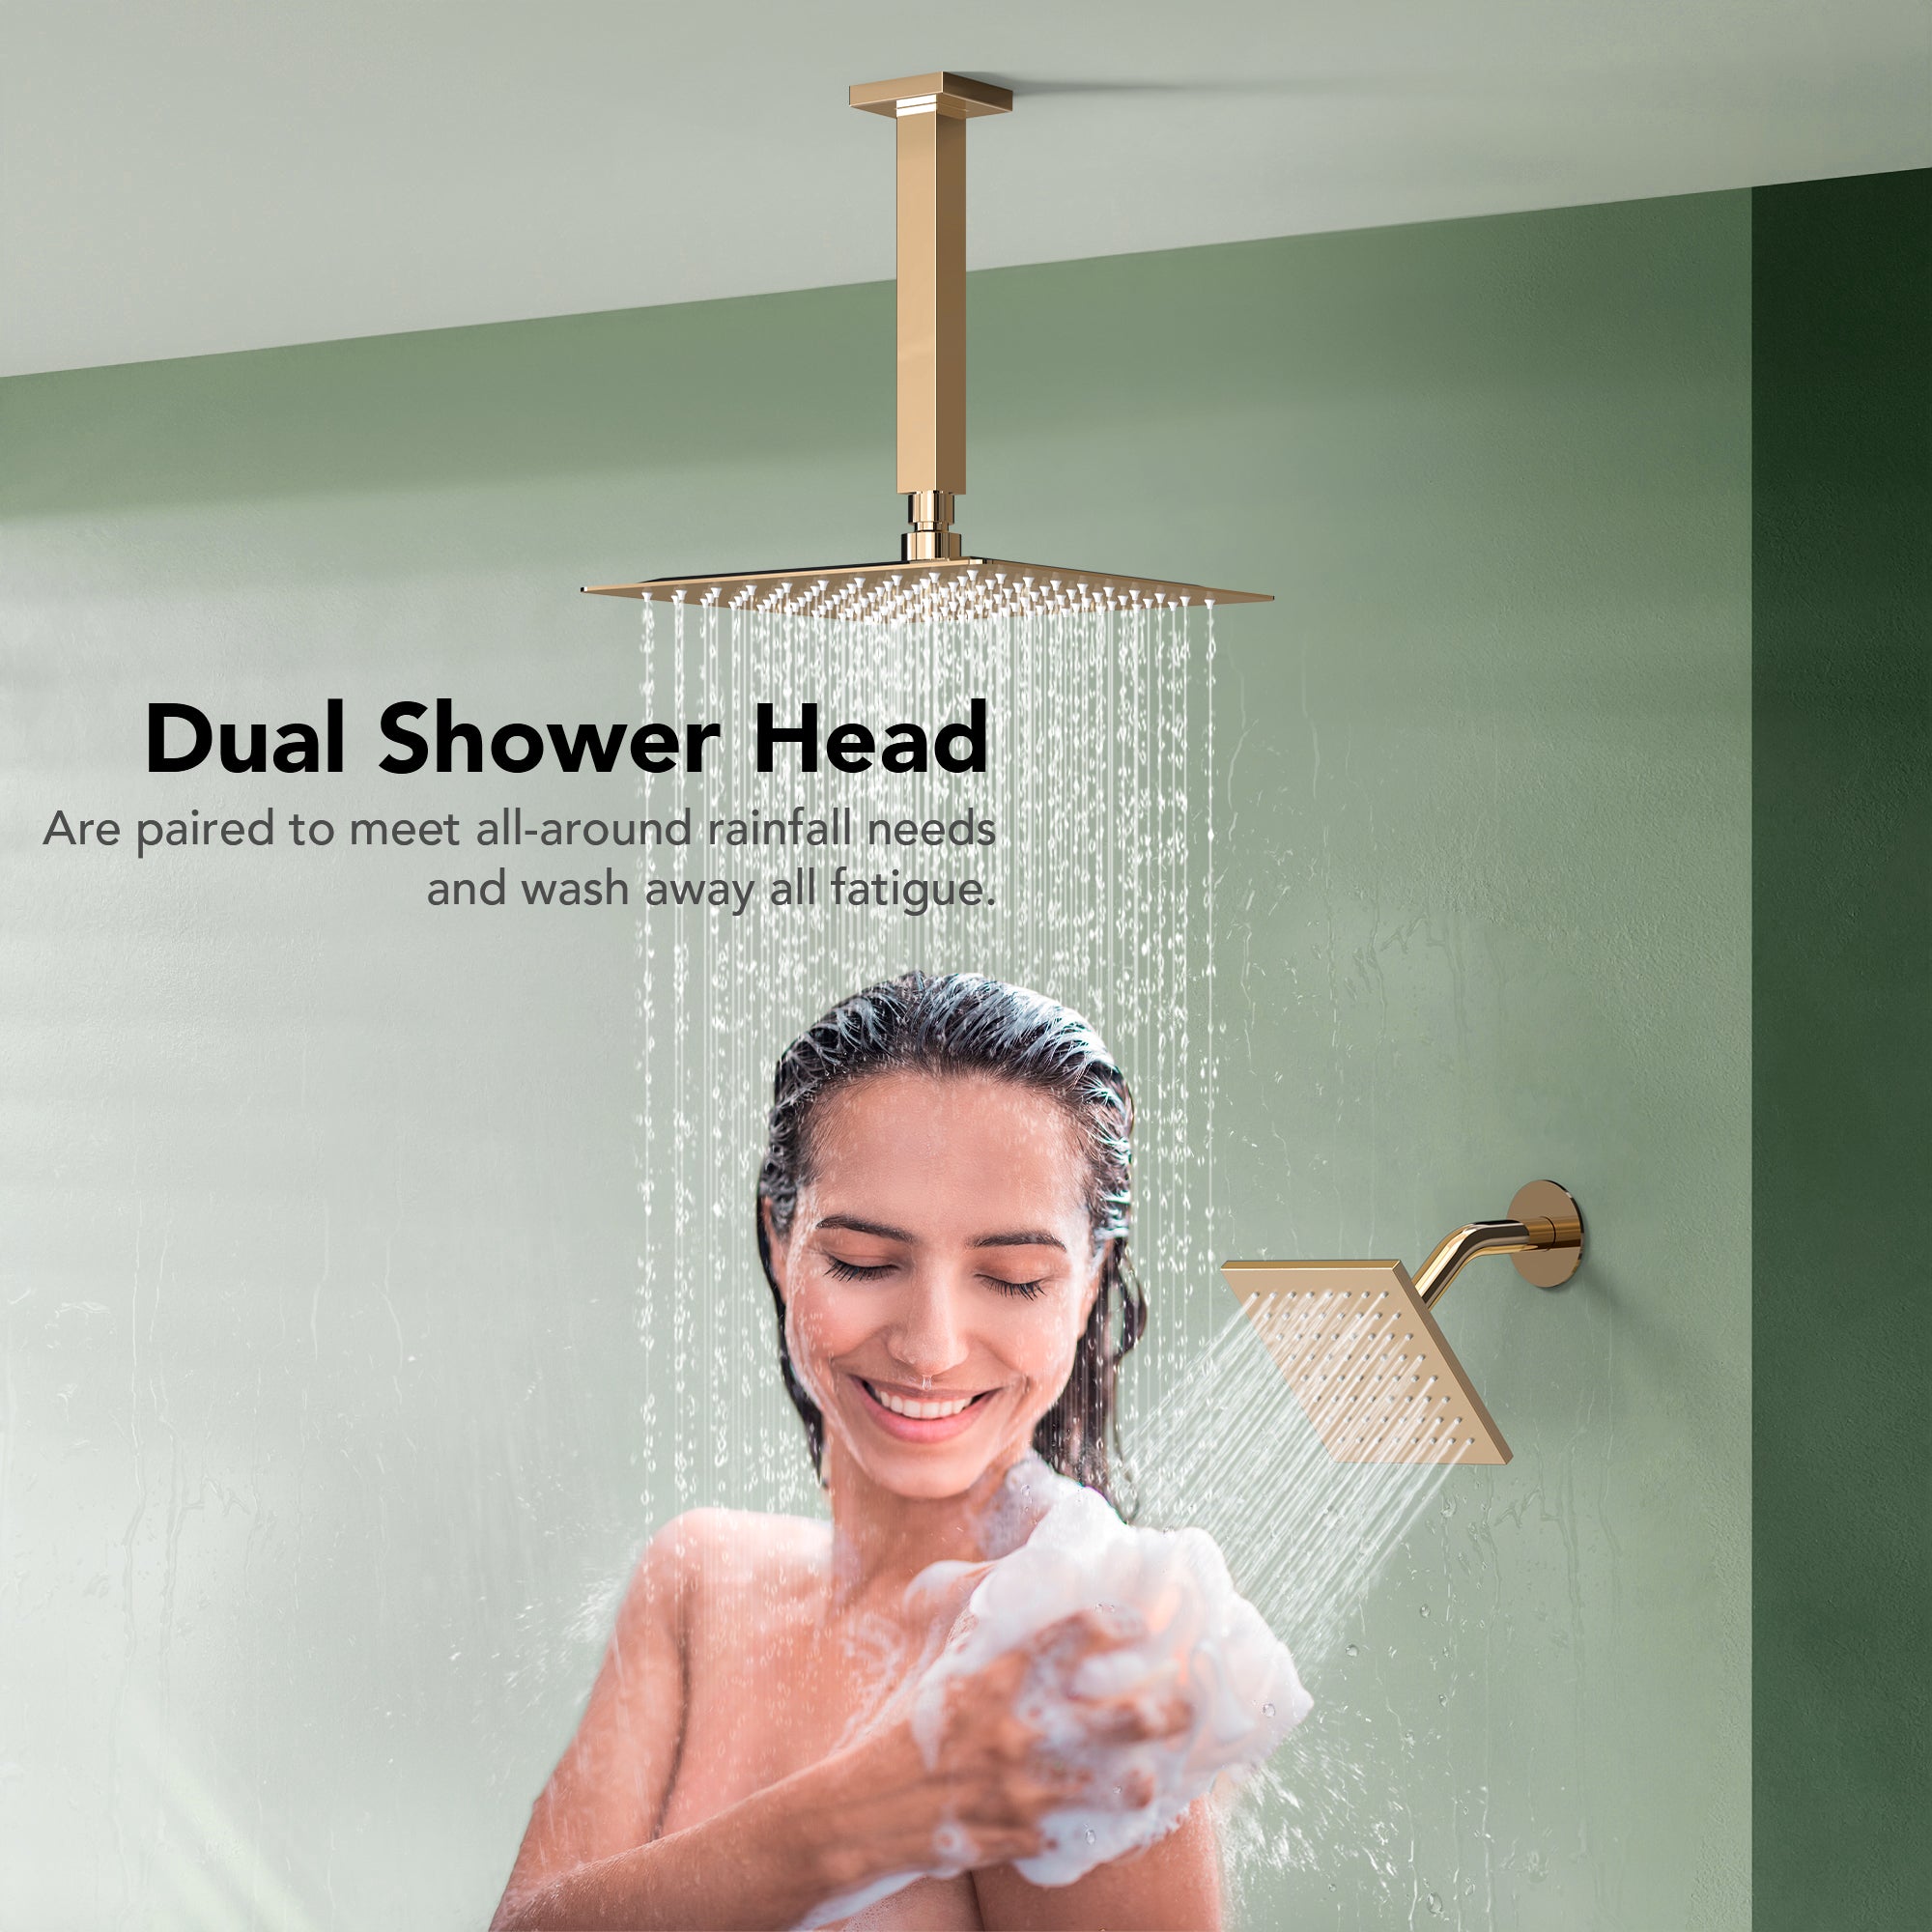 Woman showering under dual shower heads in a contemporary bathroom fixture setup